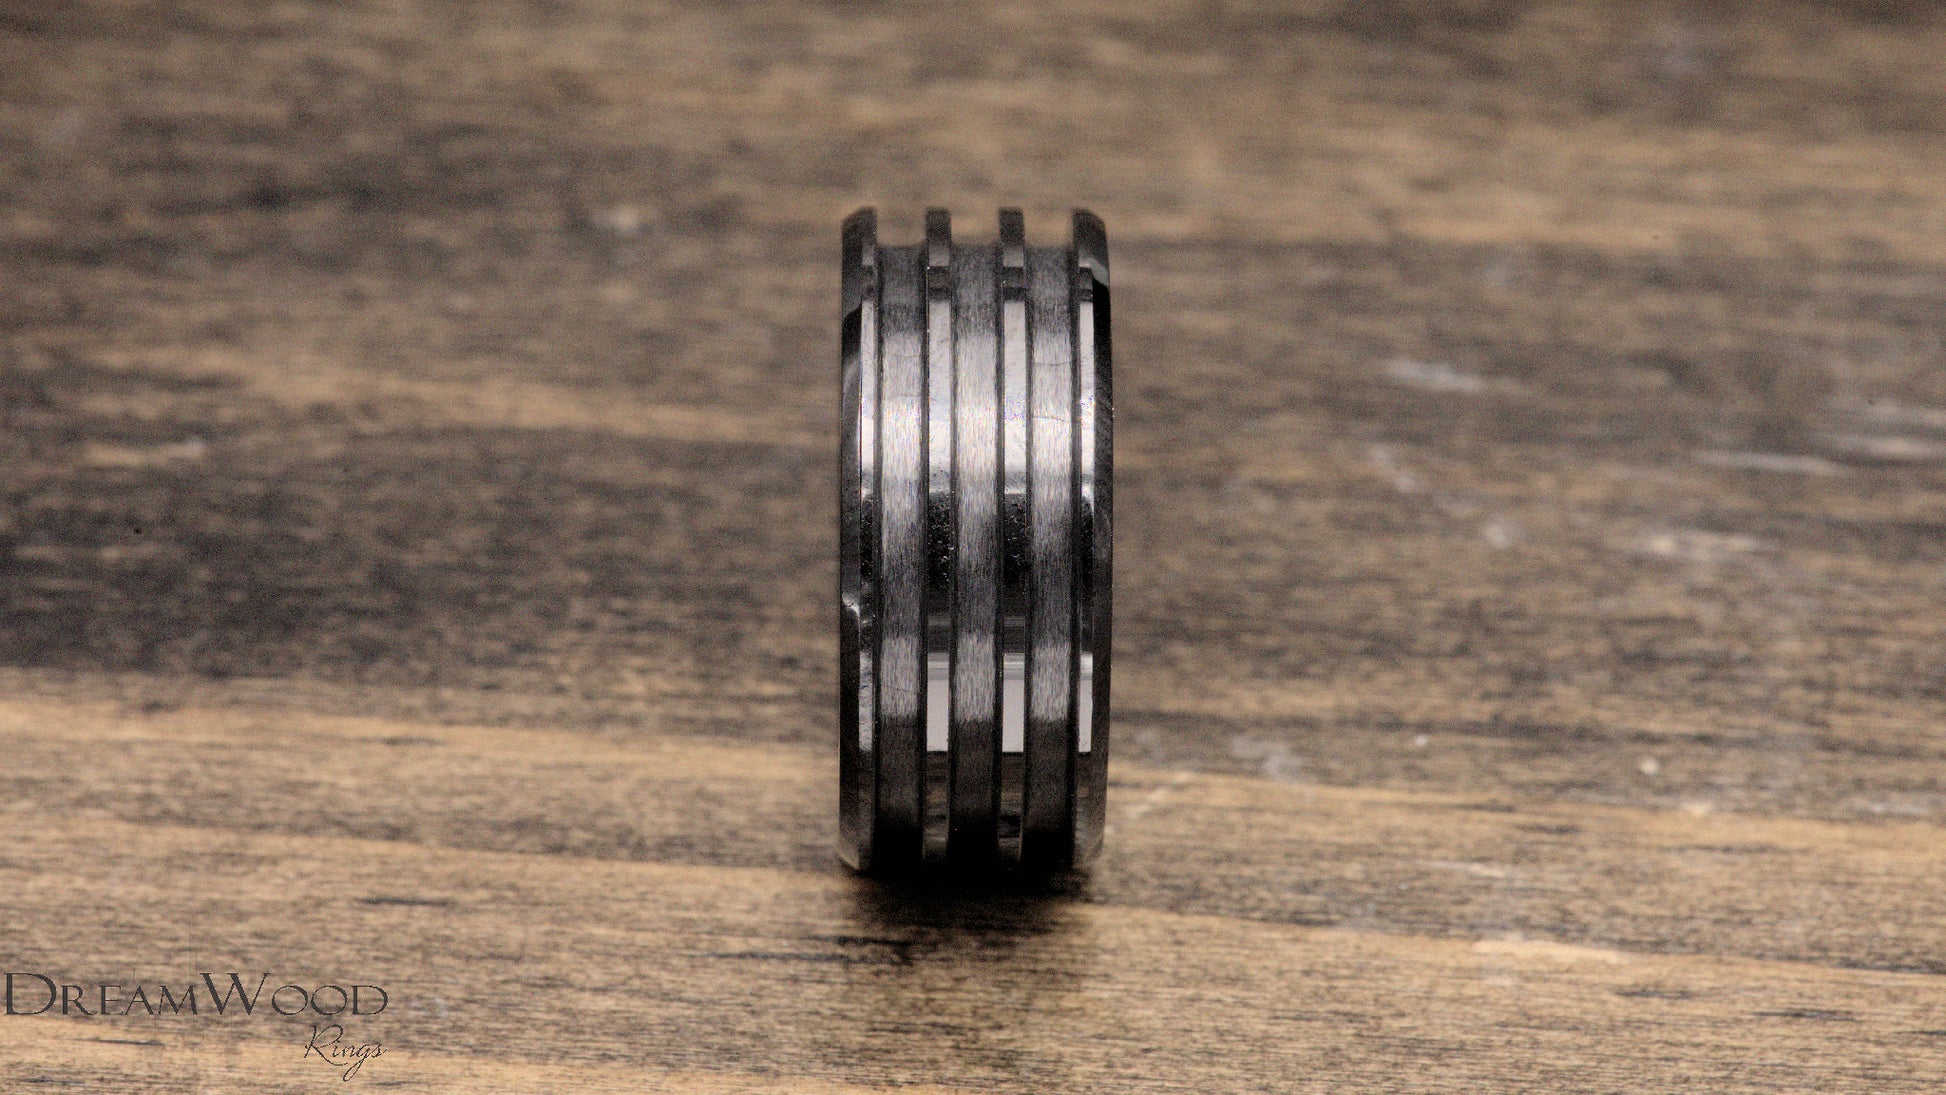 3 channel Black Ceramic | 8mm - DreamWood Rings Supplies